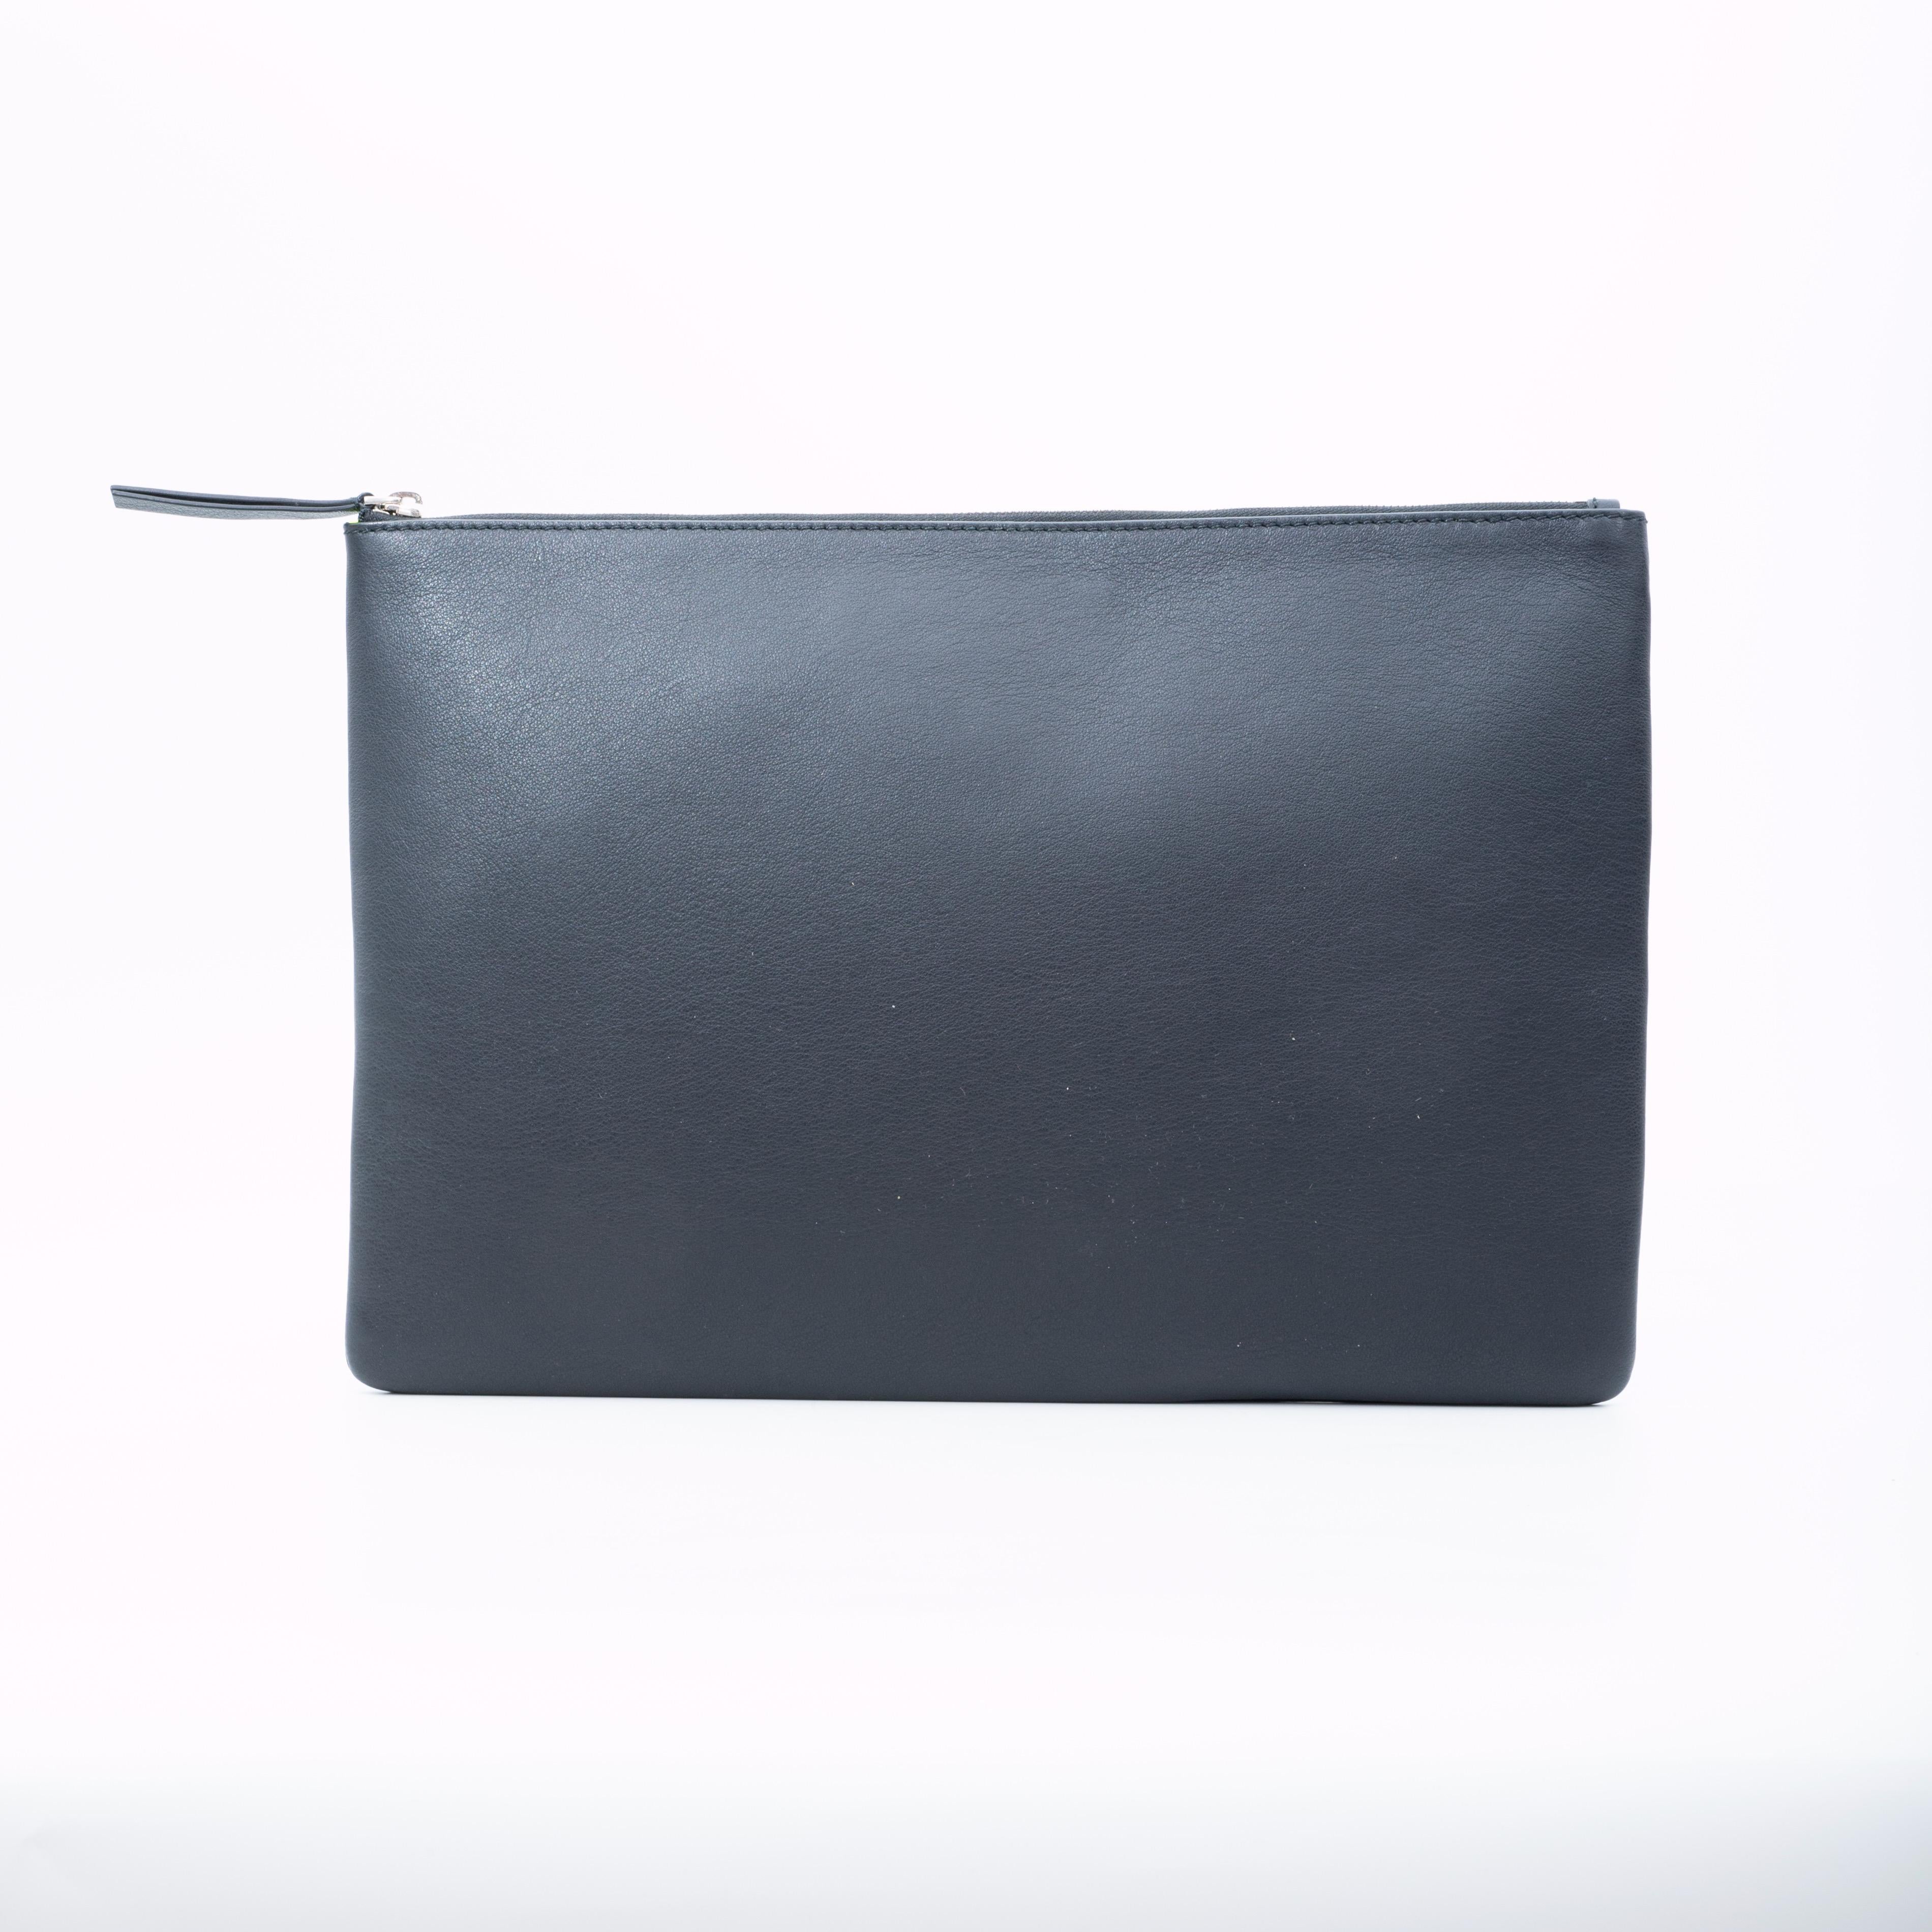 COLOR: Black
MATERIAL: Calfskin leather
ITEM CODE: 485112 1072 y 528147
MEASURES: H 10.5” x L 15.25”
COMES WITH: Dust bag, care card
CONDITION: Excellent - pristine and never used. Like new. Faint marks from handling.

Made in Italy